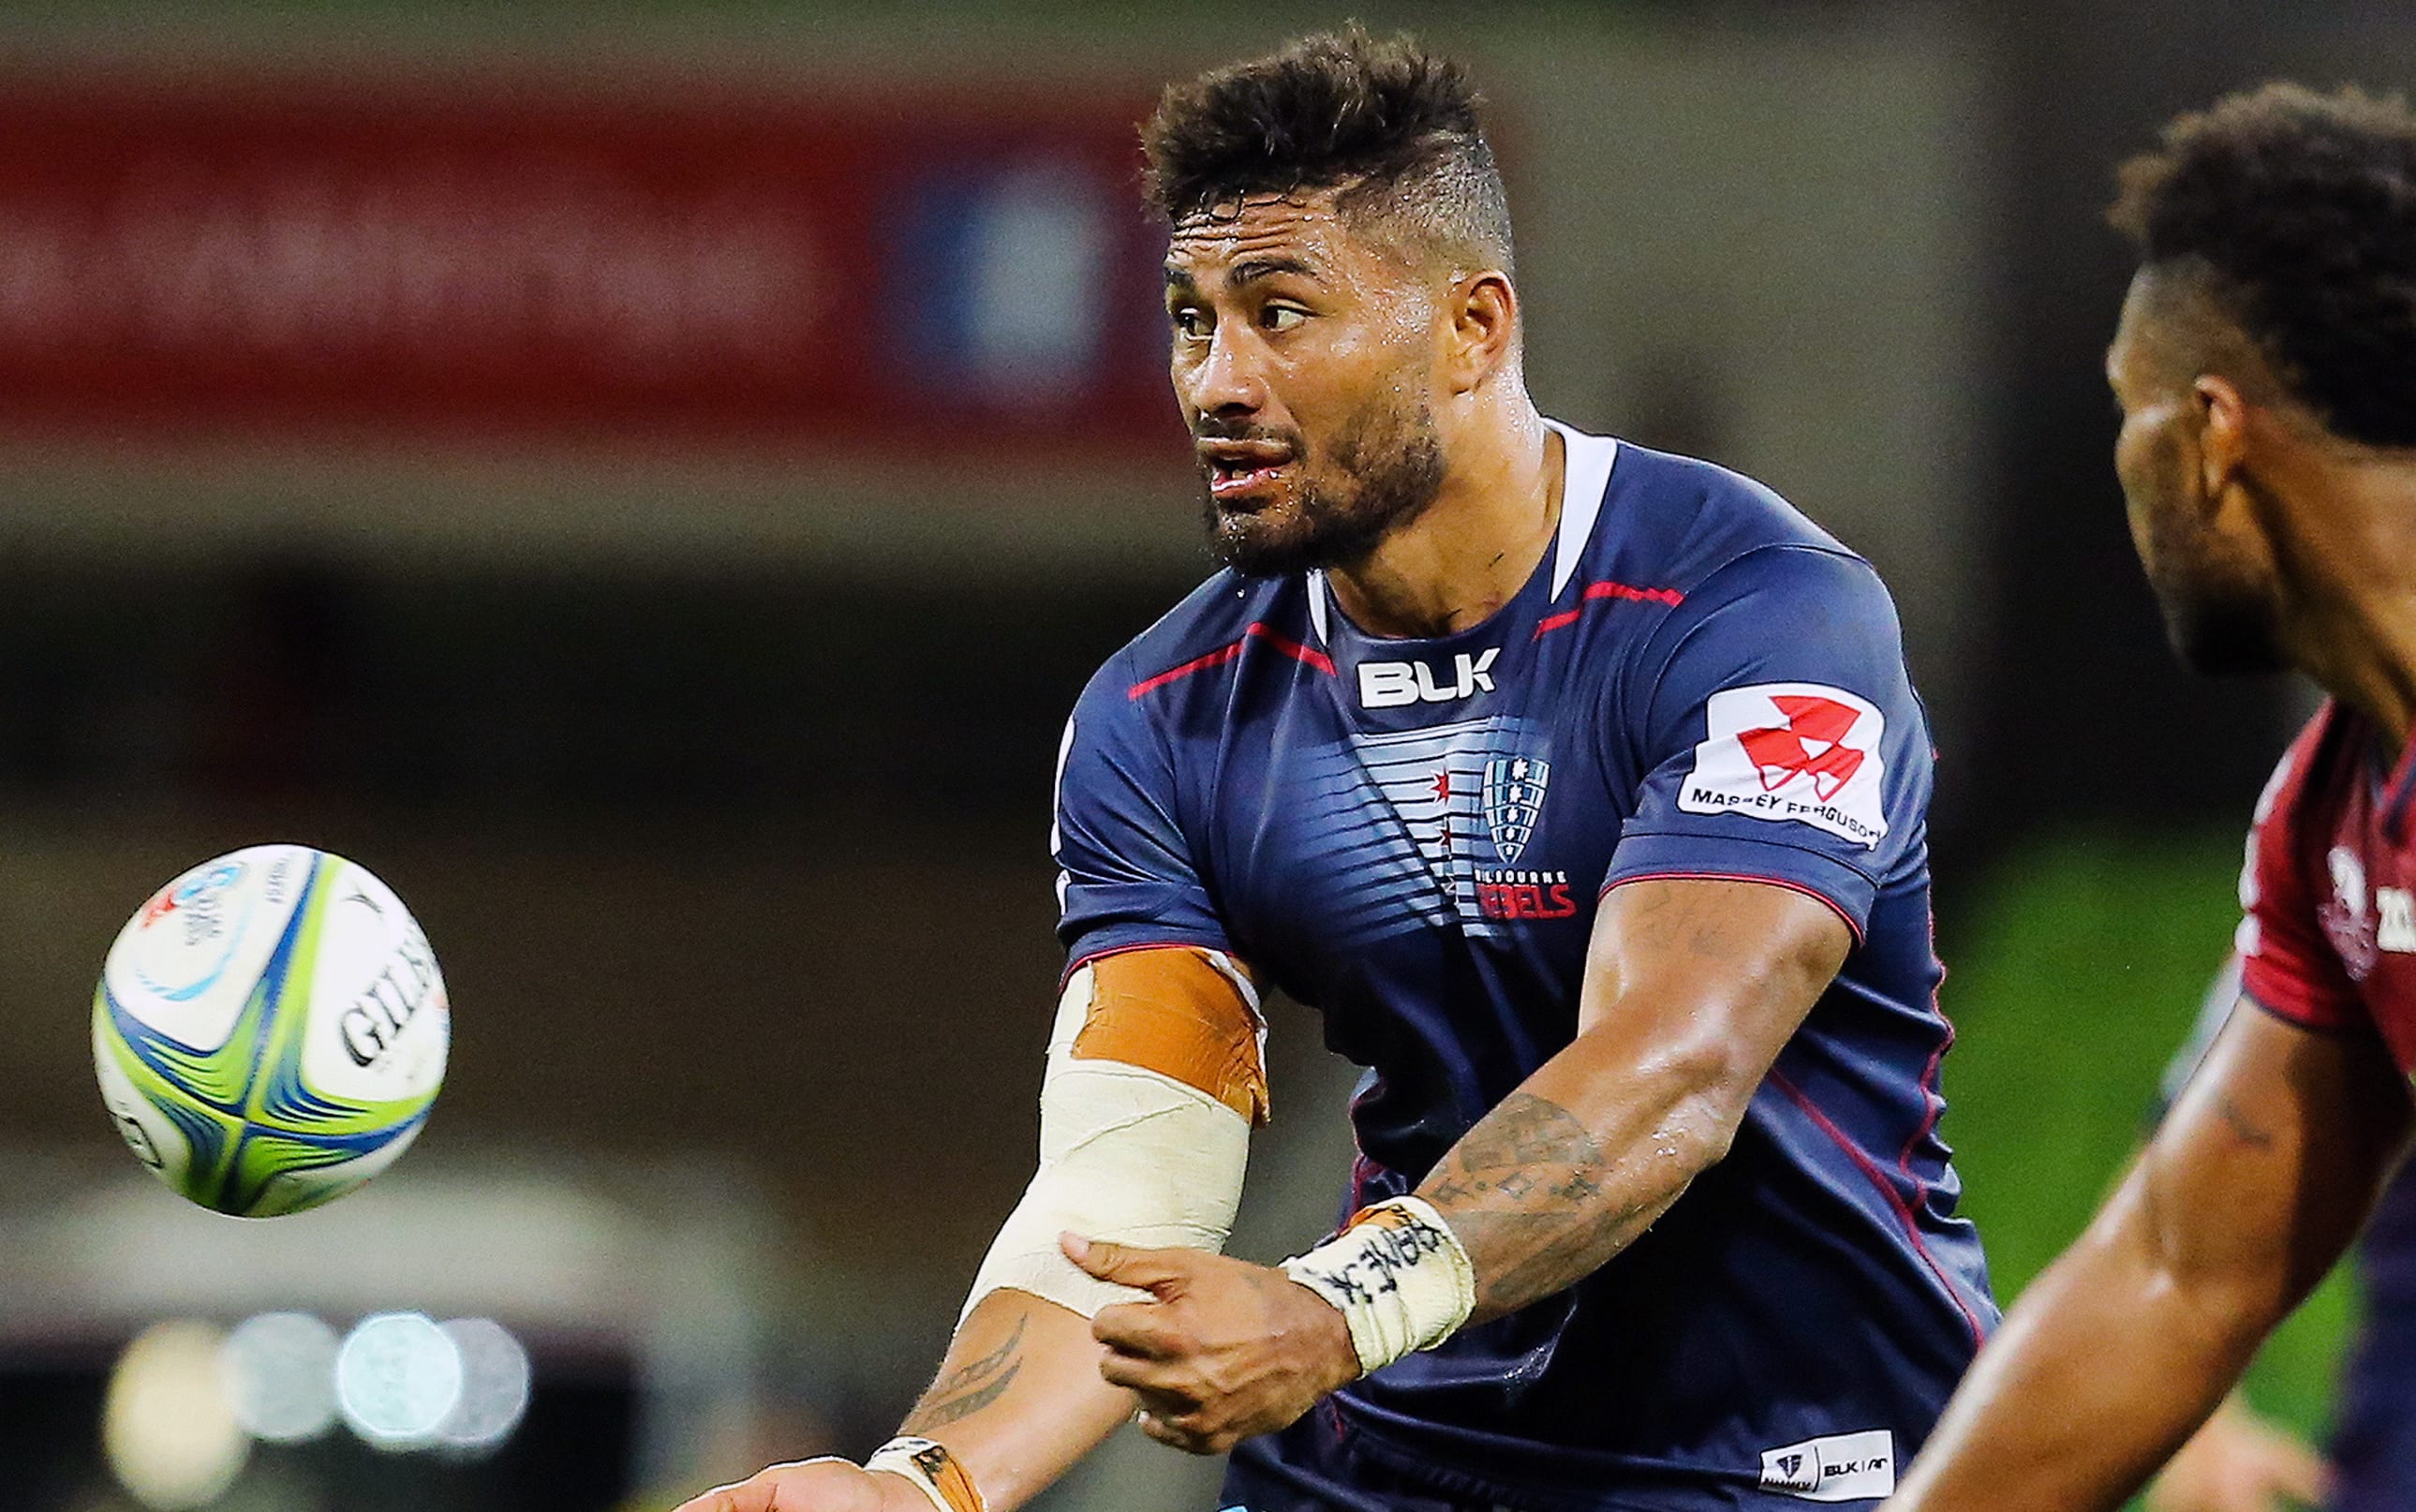 Amanaki Mafi (left) of Melbourne Rebels passes the ball during the Melbourne Rebels vs Queensland Reds in the Vodafone Super Rugby at AMMI Park, Melbourne, Australia on 23 February 2018.